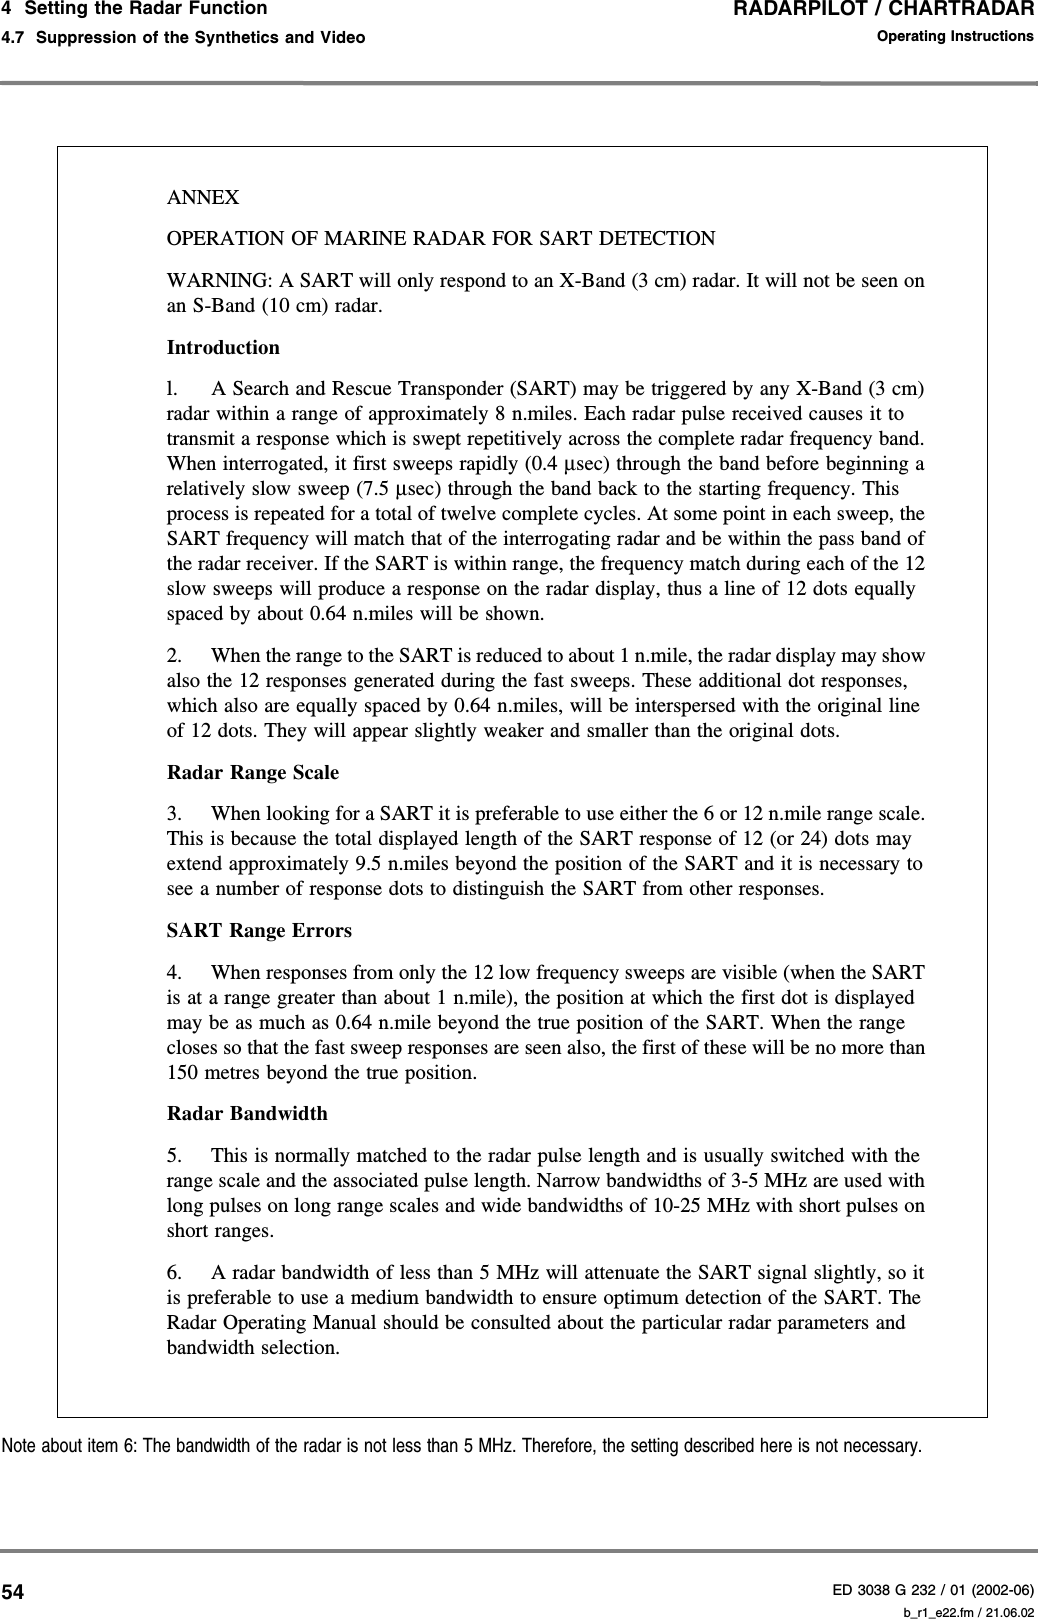 RADARPILOT / CHARTRADARED 3038 G 232 / 01 (2002-06)Operating Instructions4  Setting the Radar Function4.7  Suppression of the Synthetics and Video b_r1_e22.fm / 21.06.0254Note about item 6: The bandwidth of the radar is not less than 5 MHz. Therefore, the setting described here is not necessary.ANNEXOPERATION OF MARINE RADAR FOR SART DETECTIONWARNING: A SART will only respond to an X-Band (3 cm) radar. It will not be seen on an S-Band (10 cm) radar. Introduction l. A Search and Rescue Transponder (SART) may be triggered by any X-Band (3 cm) radar within a range of approximately 8 n.miles. Each radar pulse received causes it to transmit a response which is swept repetitively across the complete radar frequency band. When interrogated, it first sweeps rapidly (0.4 µsec) through the band before beginning a relatively slow sweep (7.5 µsec) through the band back to the starting frequency. This process is repeated for a total of twelve complete cycles. At some point in each sweep, the SART frequency will match that of the interrogating radar and be within the pass band of the radar receiver. If the SART is within range, the frequency match during each of the 12 slow sweeps will produce a response on the radar display, thus a line of 12 dots equally spaced by about 0.64 n.miles will be shown. 2.  When the range to the SART is reduced to about 1 n.mile, the radar display may show also the 12 responses generated during the fast sweeps. These additional dot responses, which also are equally spaced by 0.64 n.miles, will be interspersed with the original line of 12 dots. They will appear slightly weaker and smaller than the original dots. Radar Range Scale 3.  When looking for a SART it is preferable to use either the 6 or 12 n.mile range scale. This is because the total displayed length of the SART response of 12 (or 24) dots may extend approximately 9.5 n.miles beyond the position of the SART and it is necessary to see a number of response dots to distinguish the SART from other responses. SART Range Errors 4.  When responses from only the 12 low frequency sweeps are visible (when the SART is at a range greater than about 1 n.mile), the position at which the first dot is displayed may be as much as 0.64 n.mile beyond the true position of the SART. When the range closes so that the fast sweep responses are seen also, the first of these will be no more than 150 metres beyond the true position. Radar Bandwidth 5.  This is normally matched to the radar pulse length and is usually switched with the range scale and the associated pulse length. Narrow bandwidths of 3-5 MHz are used with long pulses on long range scales and wide bandwidths of 10-25 MHz with short pulses on short ranges. 6.  A radar bandwidth of less than 5 MHz will attenuate the SART signal slightly, so it is preferable to use a medium bandwidth to ensure optimum detection of the SART. The Radar Operating Manual should be consulted about the particular radar parameters and bandwidth selection. 